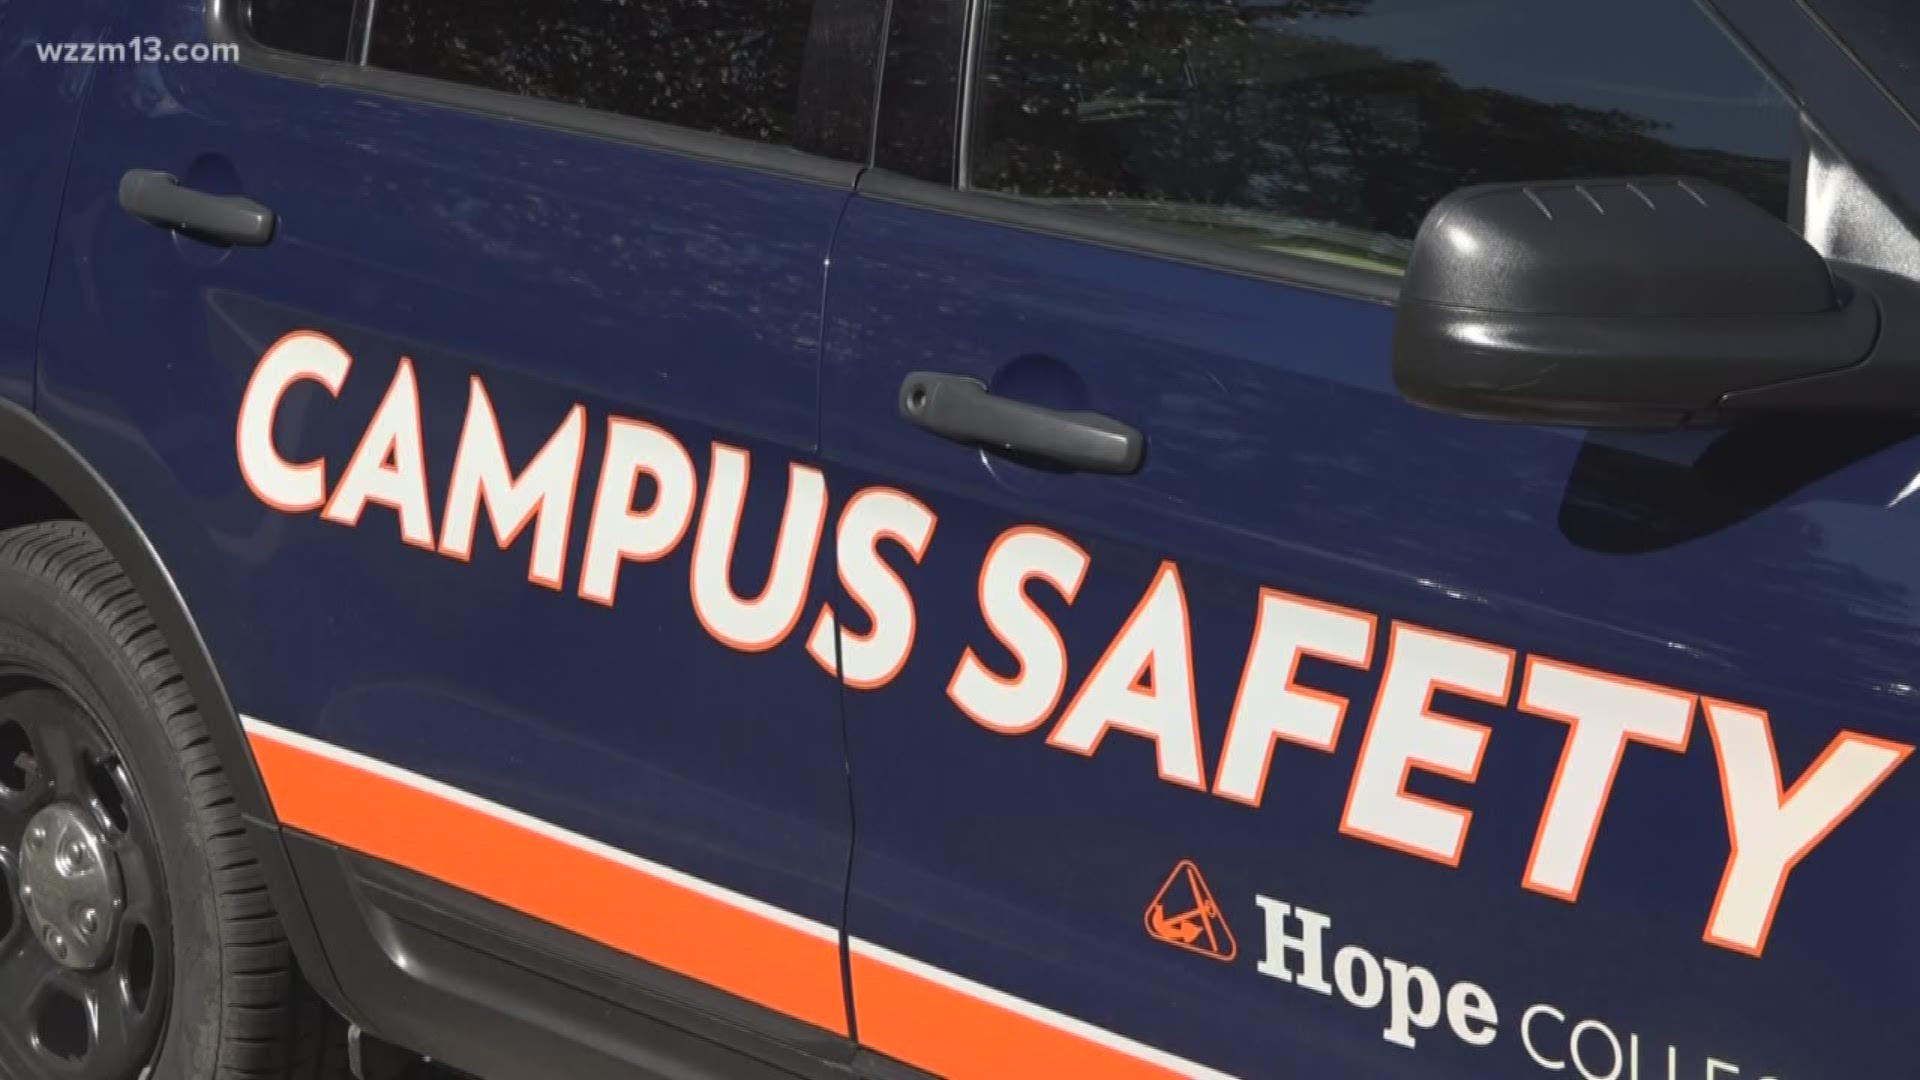 Recent crimes reported near Hope College